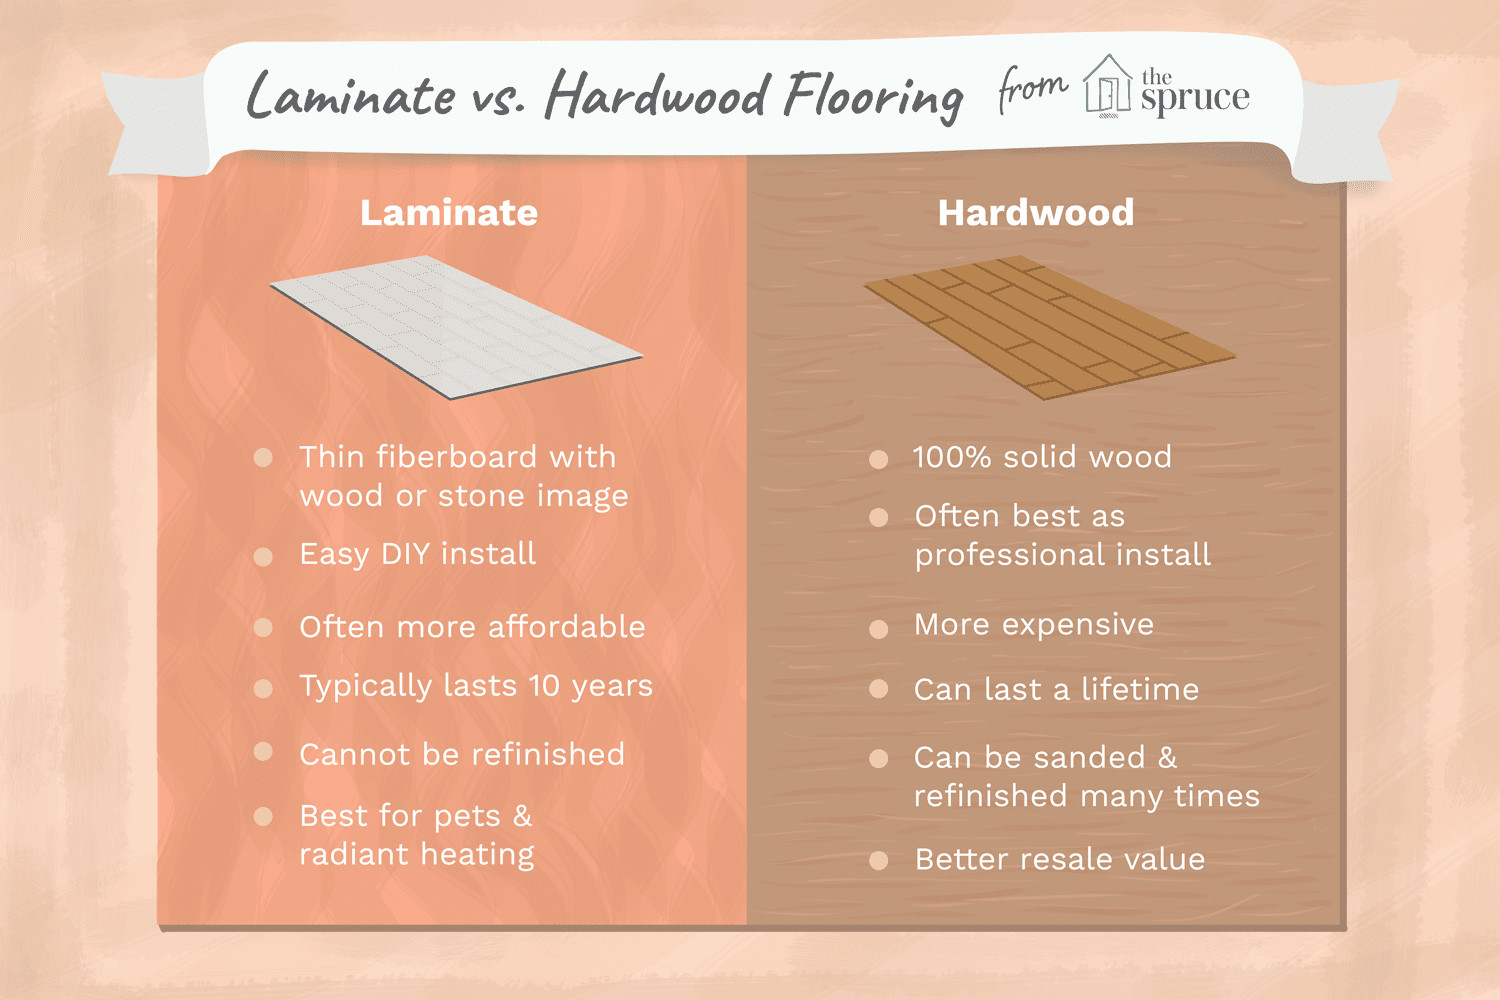 benefits of hardwood flooring vs laminate of laminate vs hardwood doesnt have to be a hard decision regarding laminate vs hardwood flooring how they compare 1821870 final 5bae84f24cedfd0026f4205d